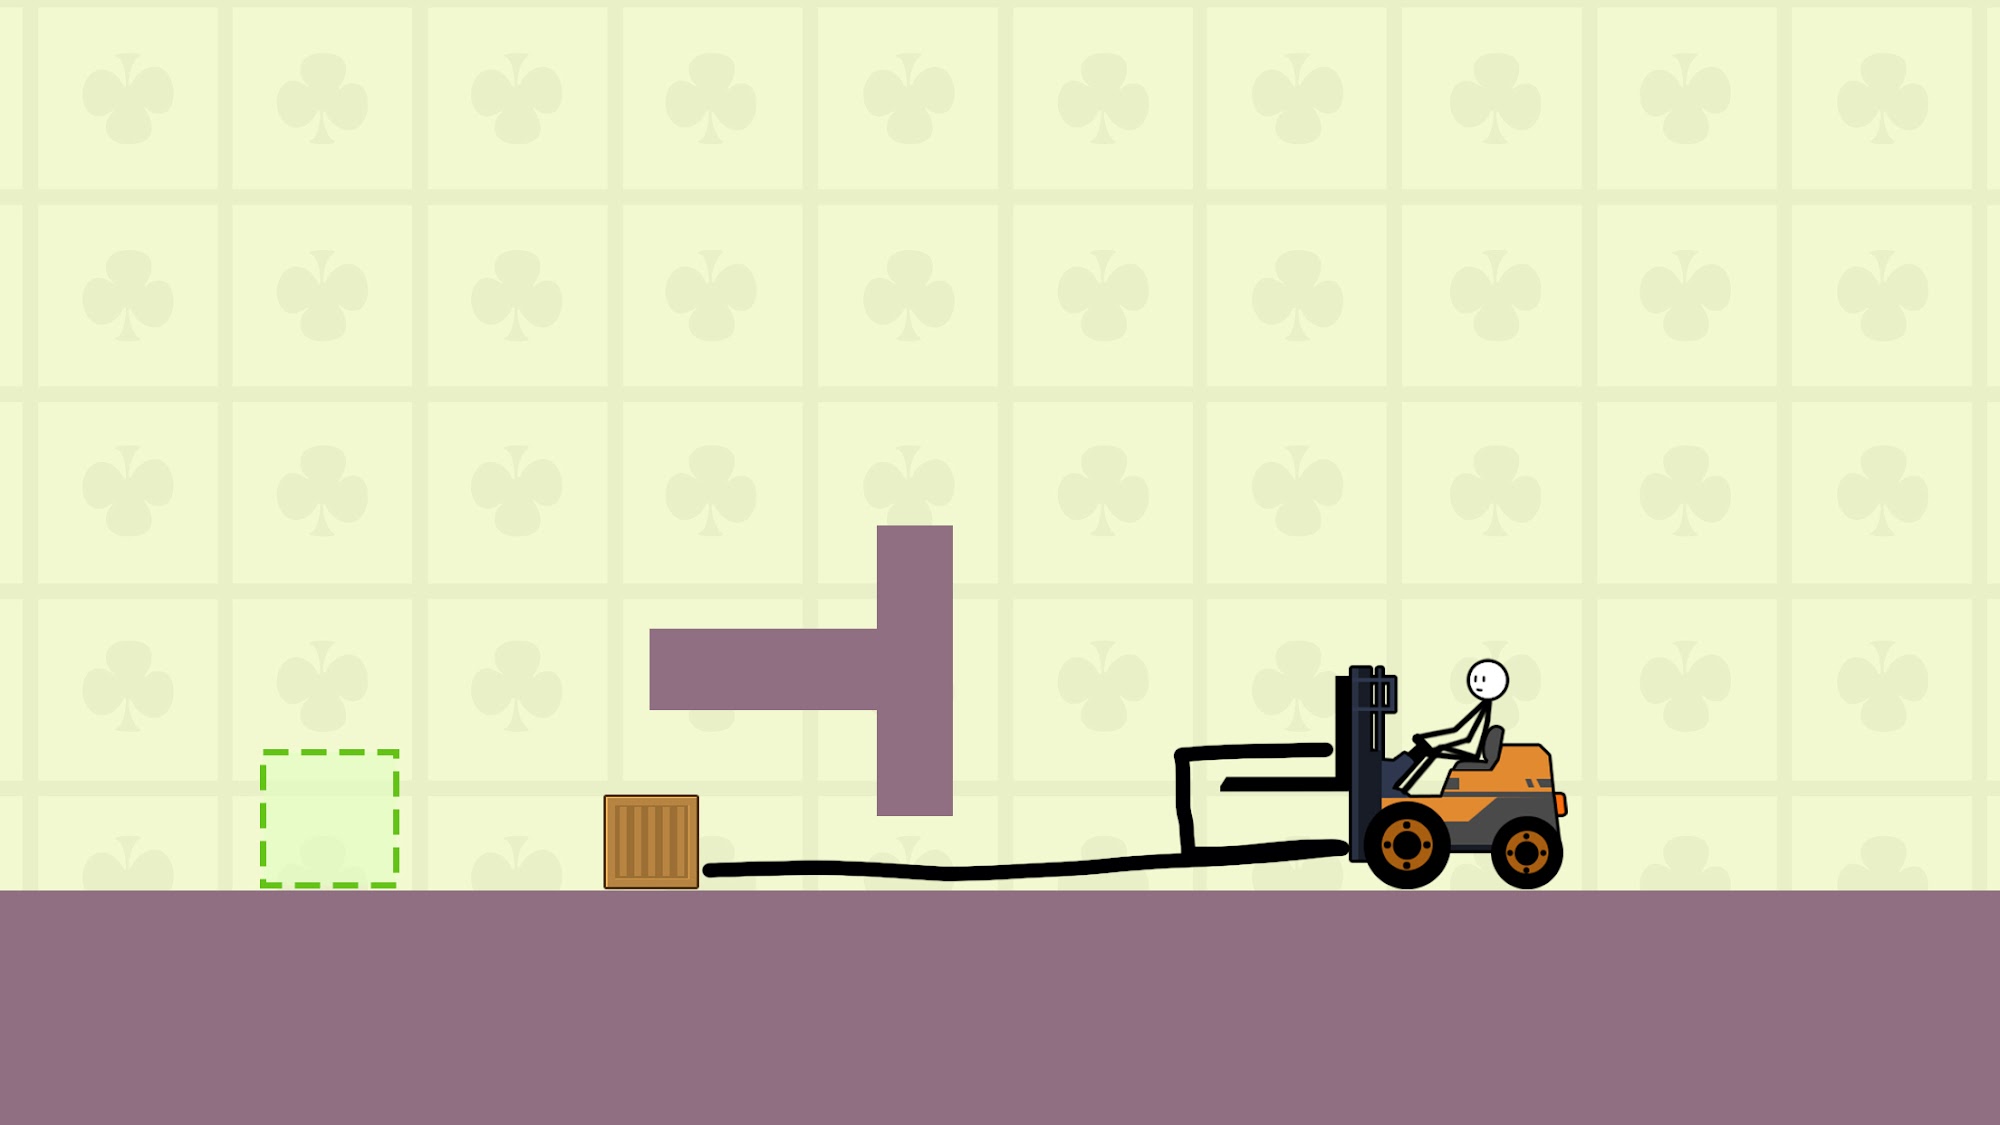 Stickman Physic Draw Puzzle - Android game screenshots.